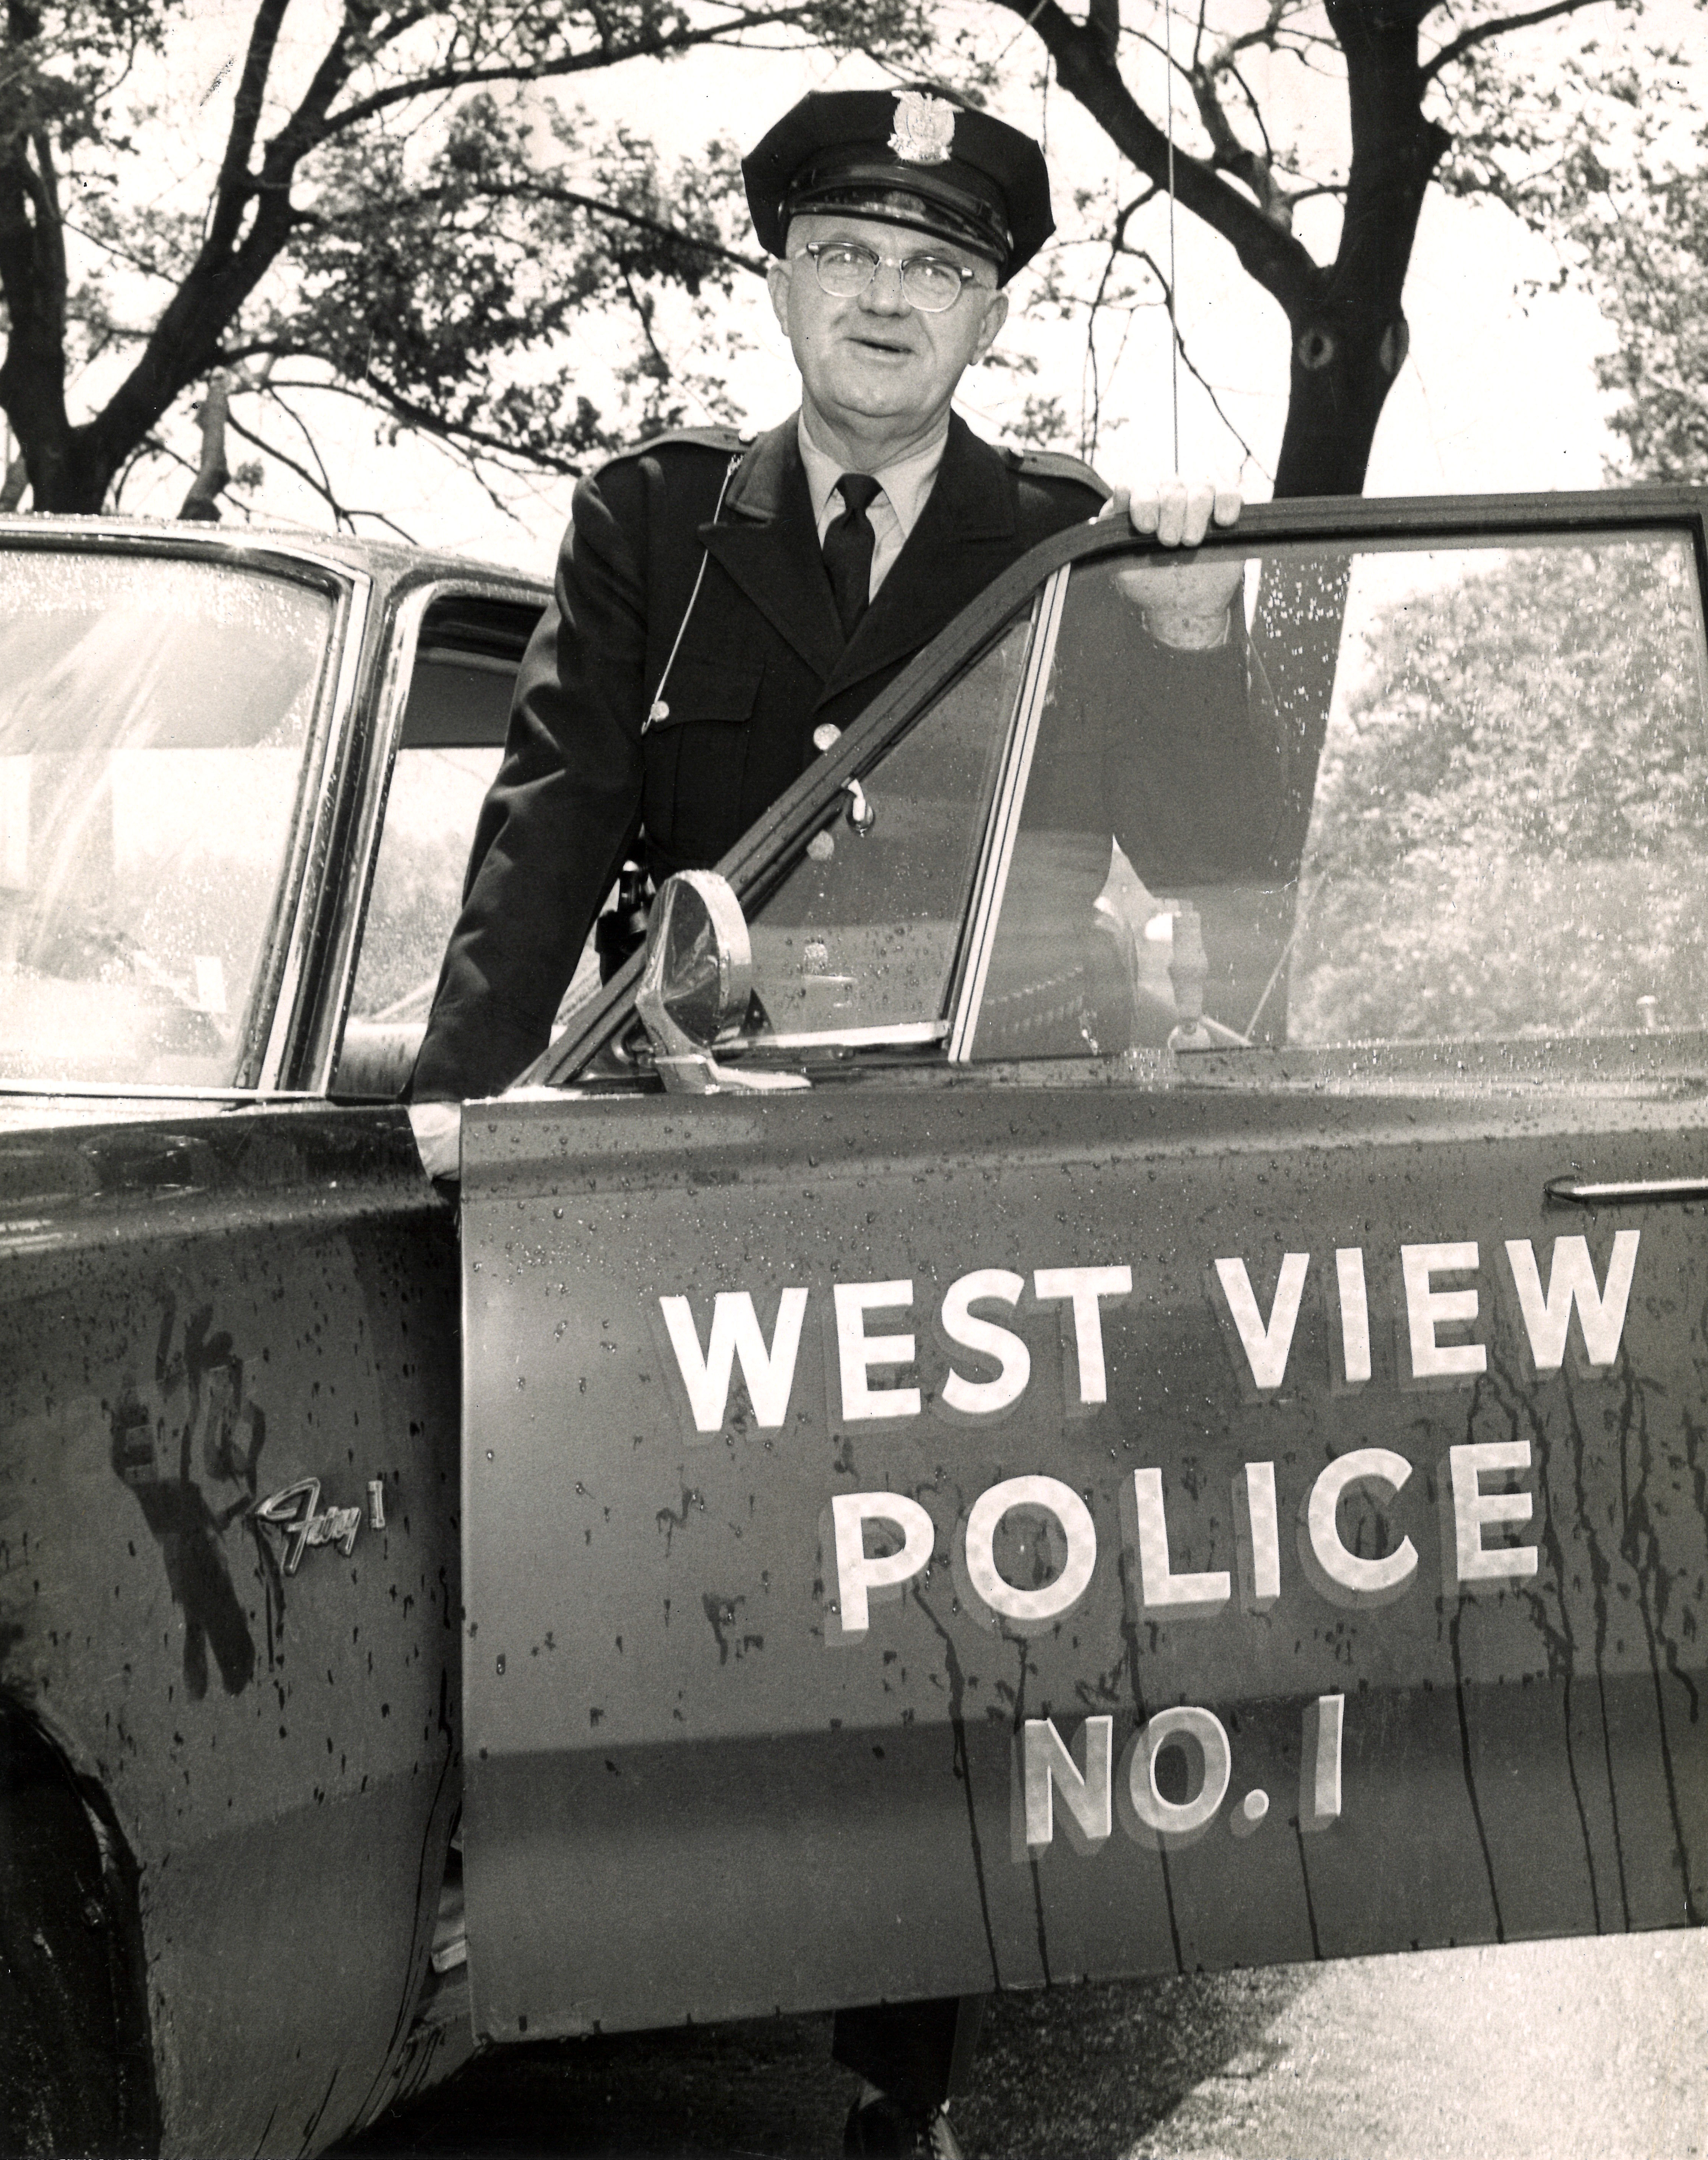 Chief Farley with police car